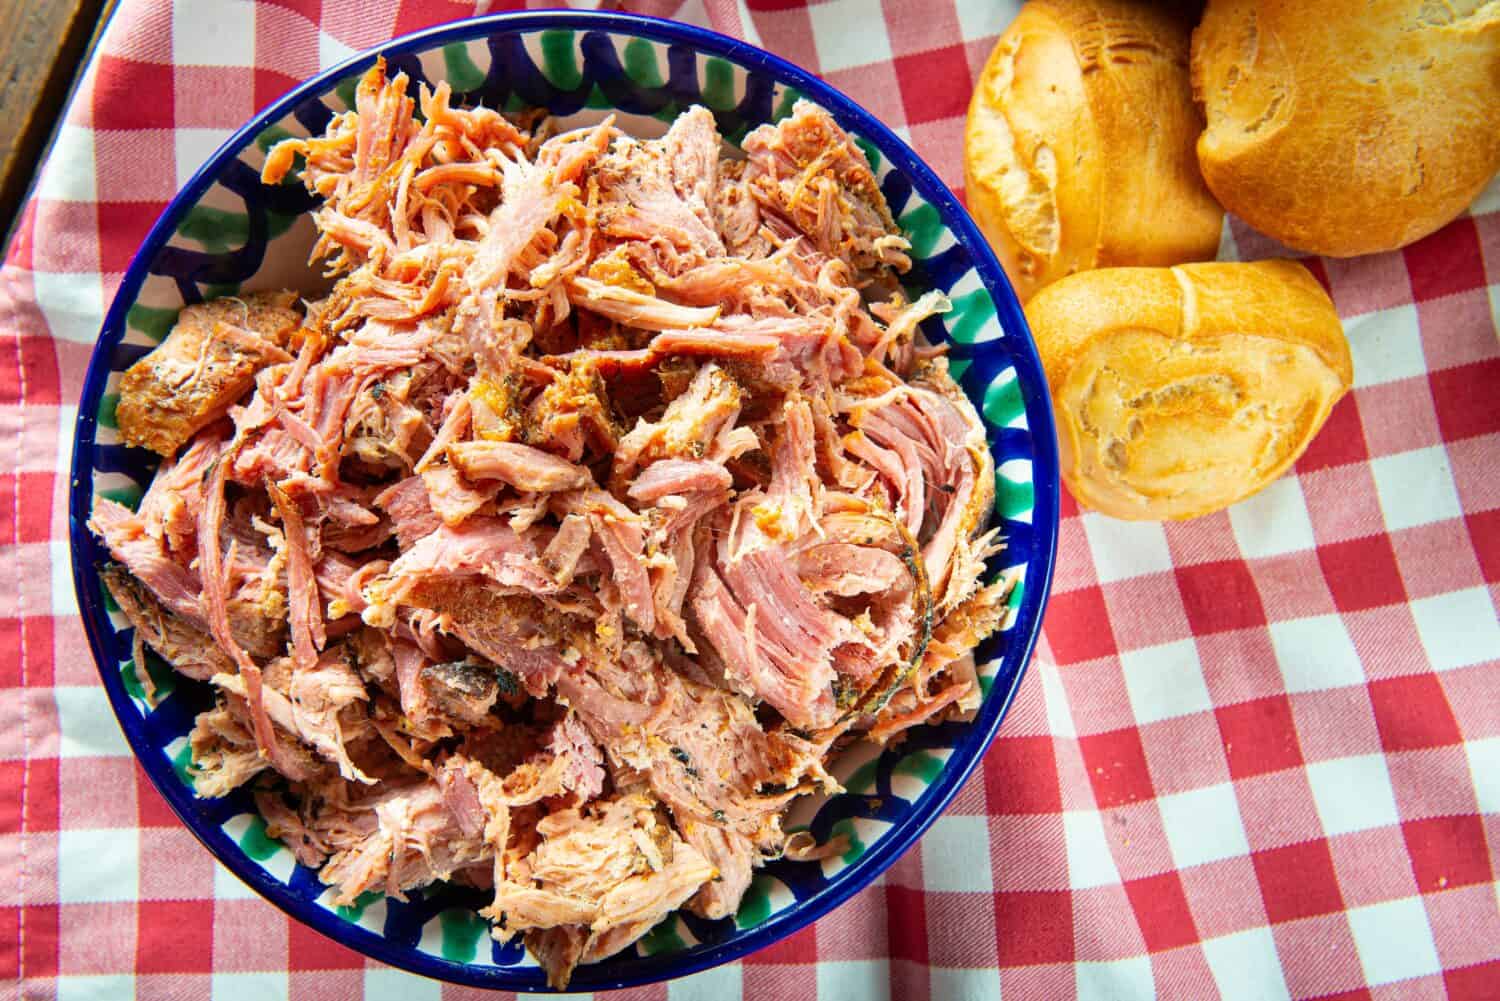 Pulled pork with vinegar barbecue sauce american style